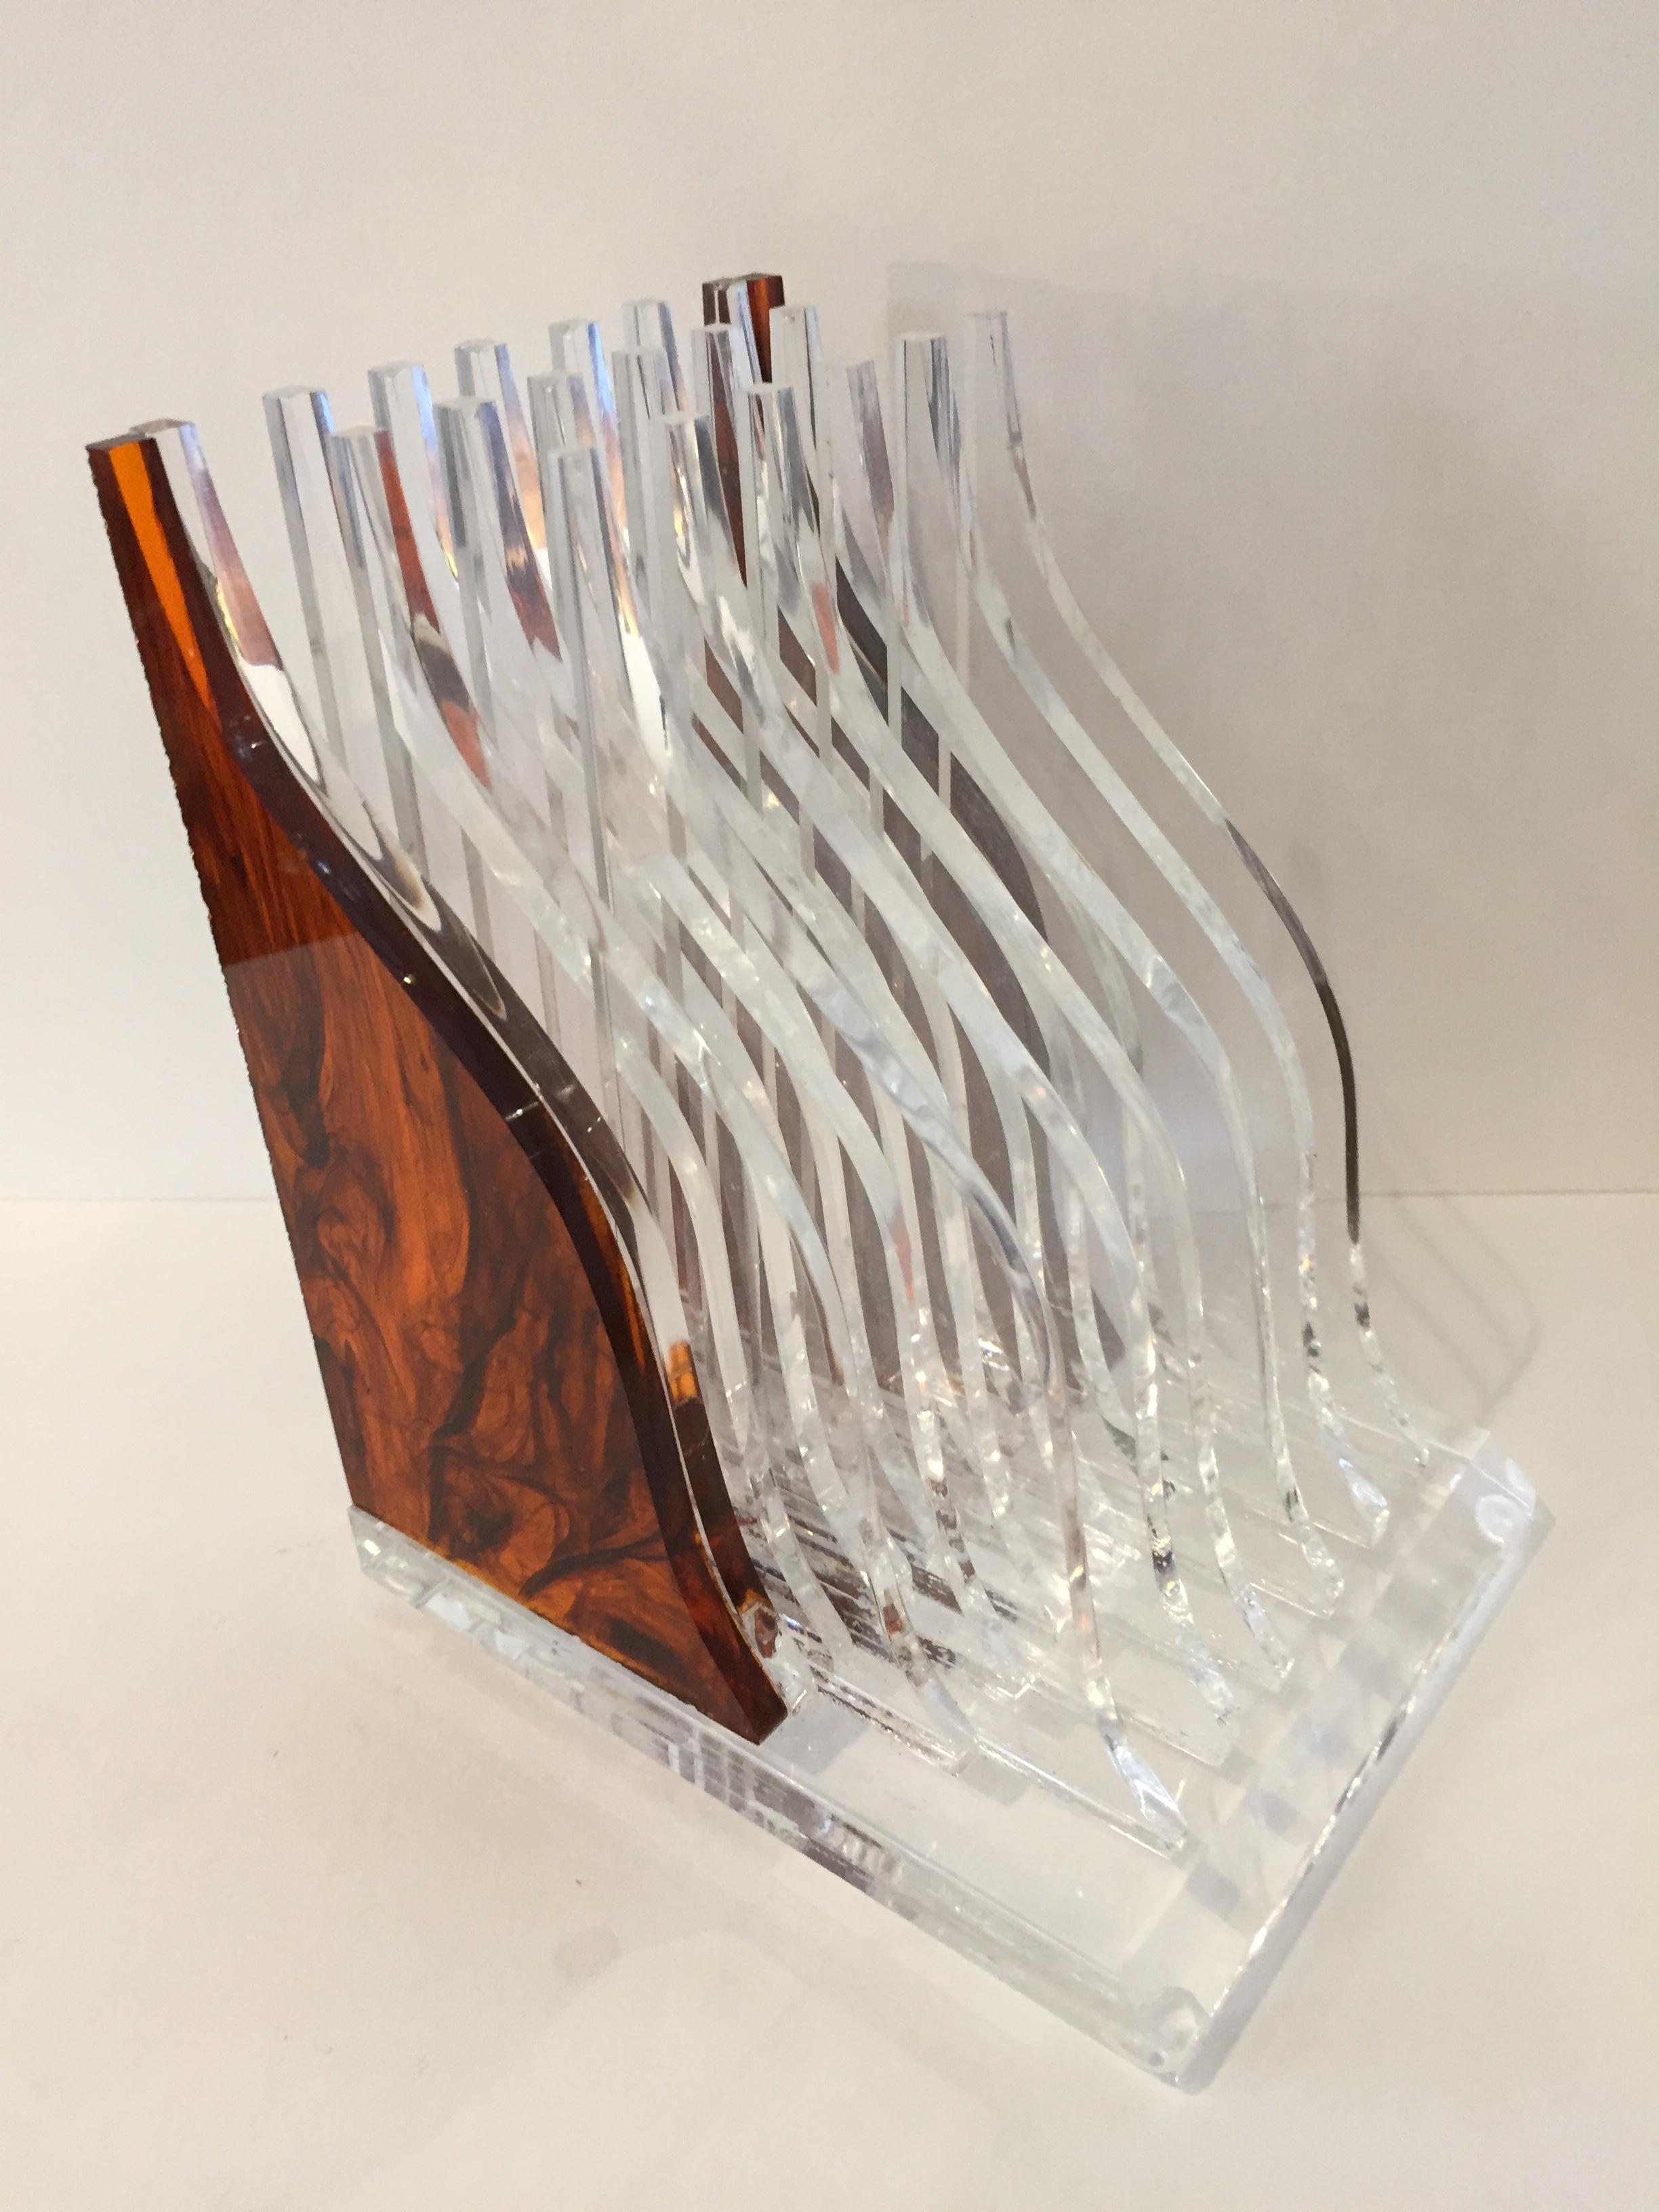 Lucite Tortoise Celluloid Streamline Book Ends In Excellent Condition For Sale In Westport, CT